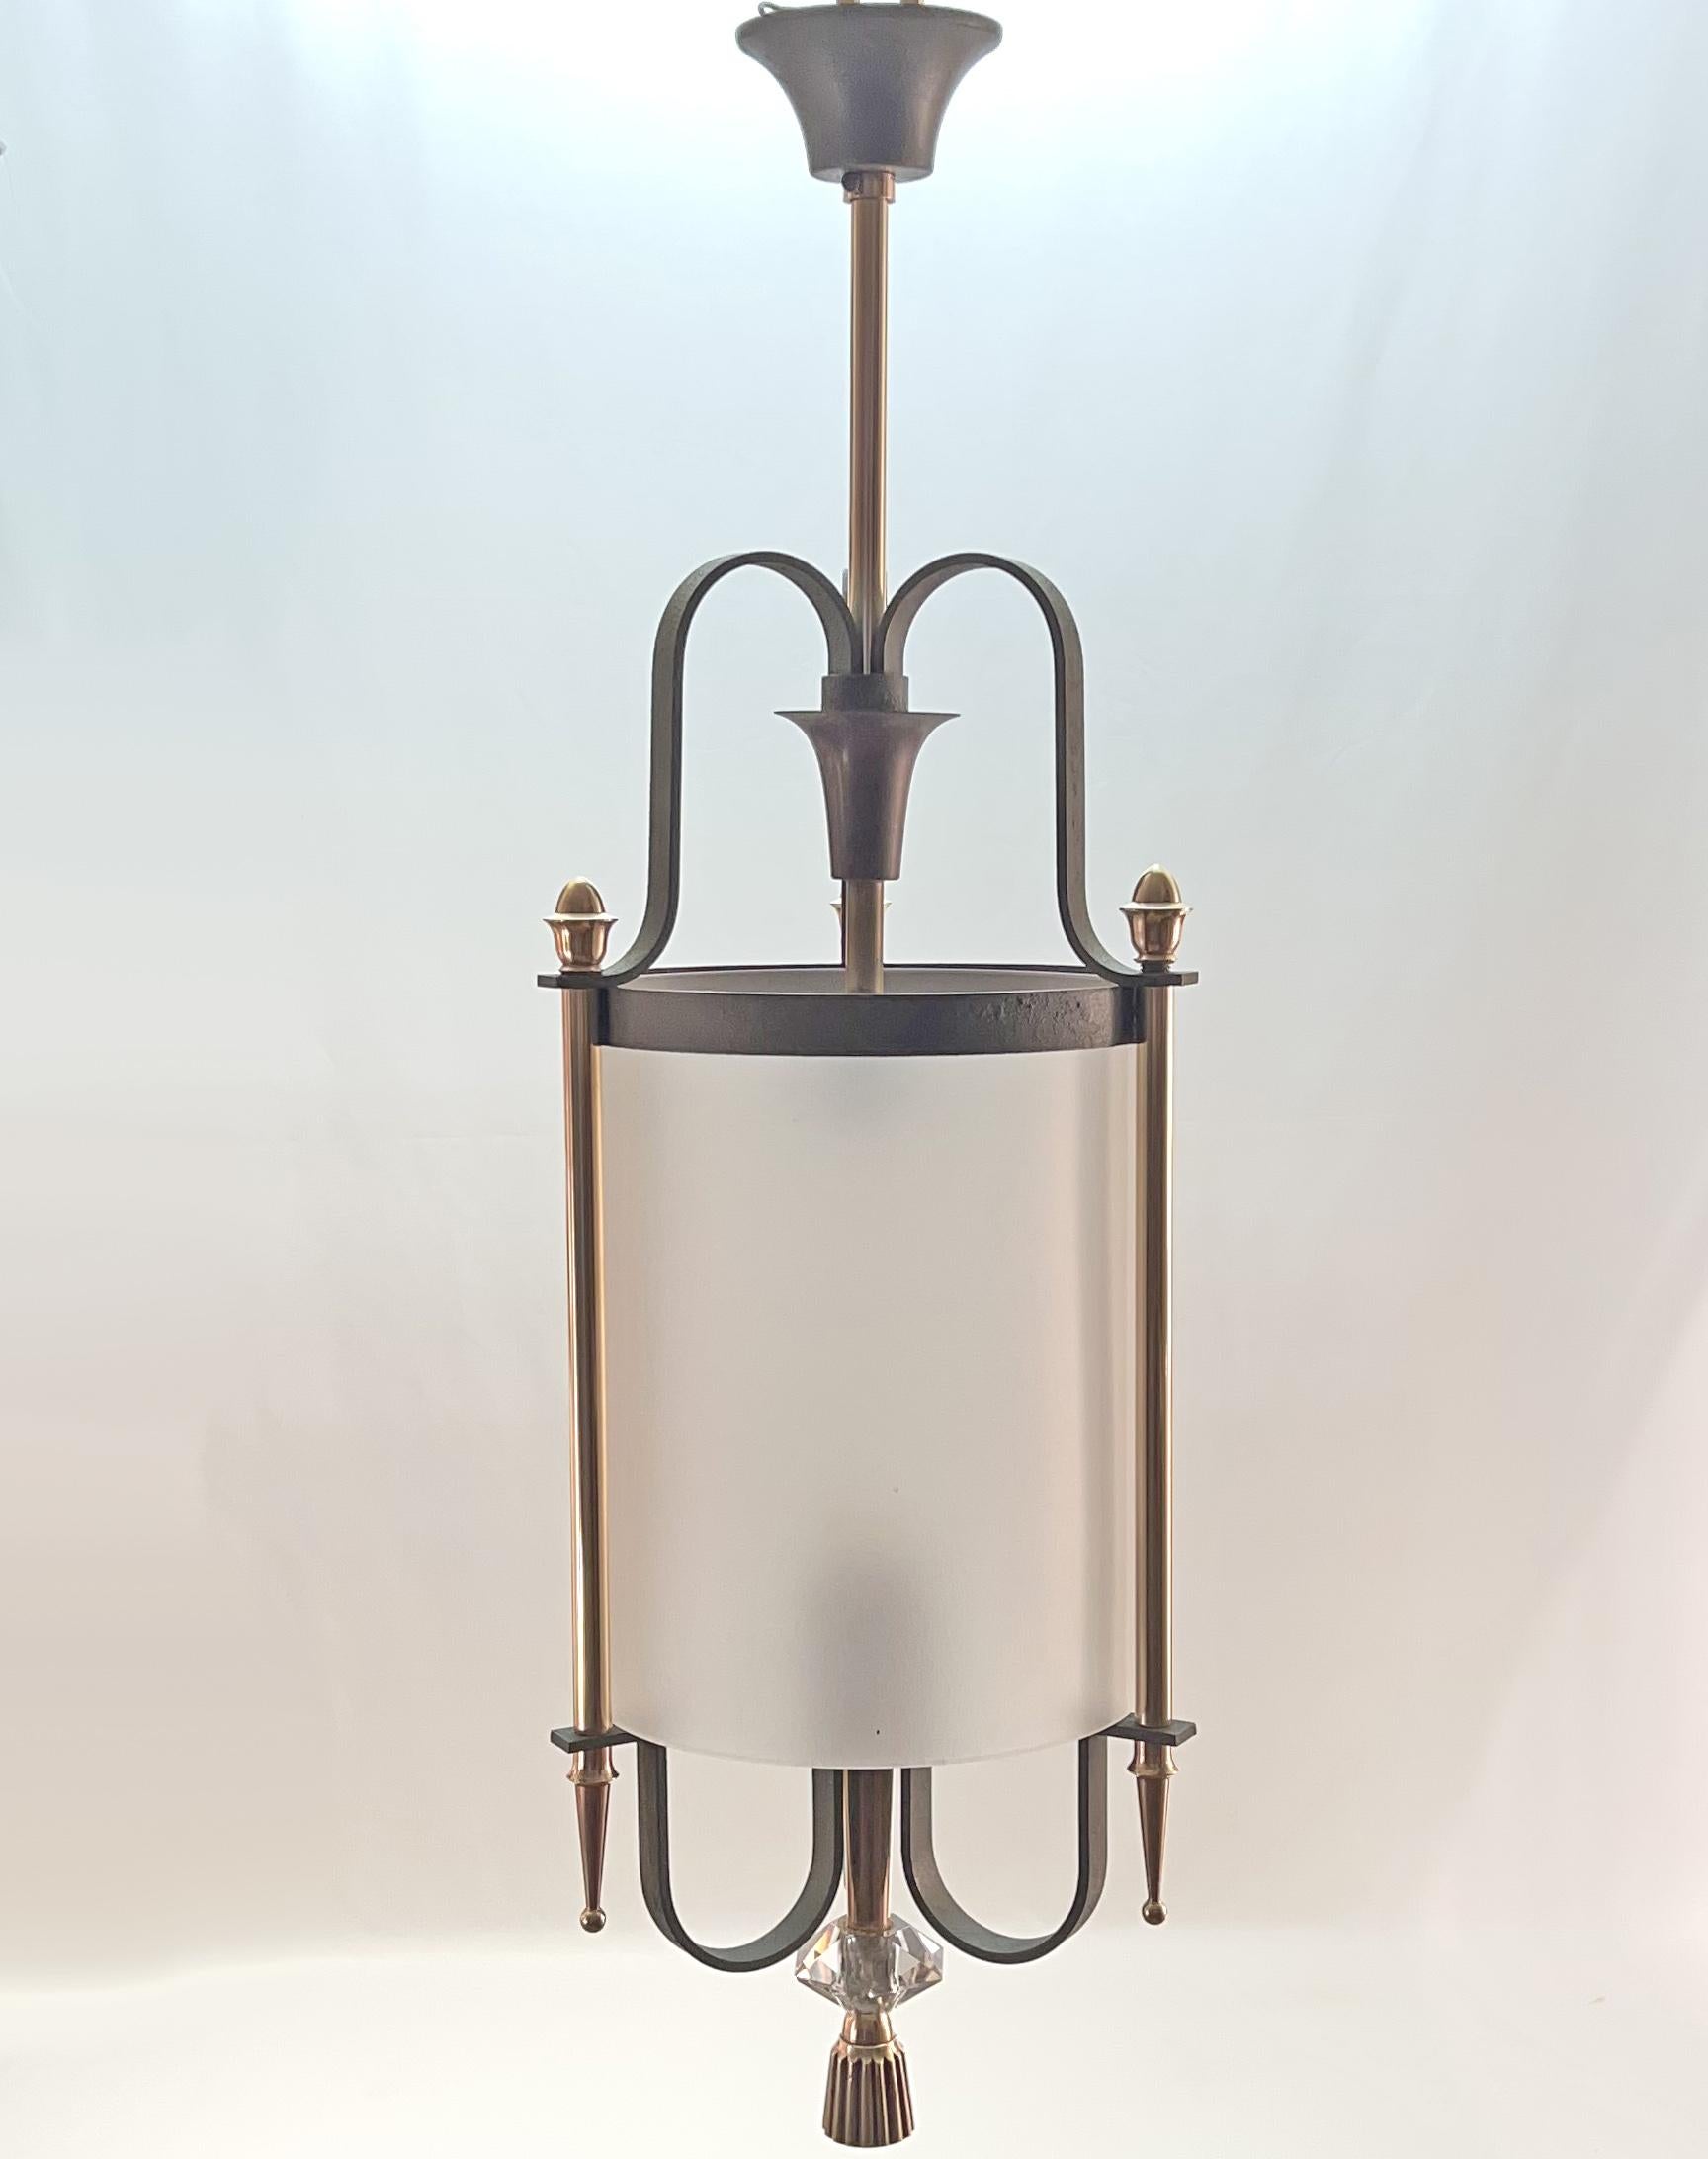 Elegant lantern circa 1940 in thick frosted cylindrical glass in a bronze and wrought iron frame with a nuanced green patina.
Attributed to Gilbert Poillerat
Perfect condition of presentation and operation (recent electrification)
Just need new